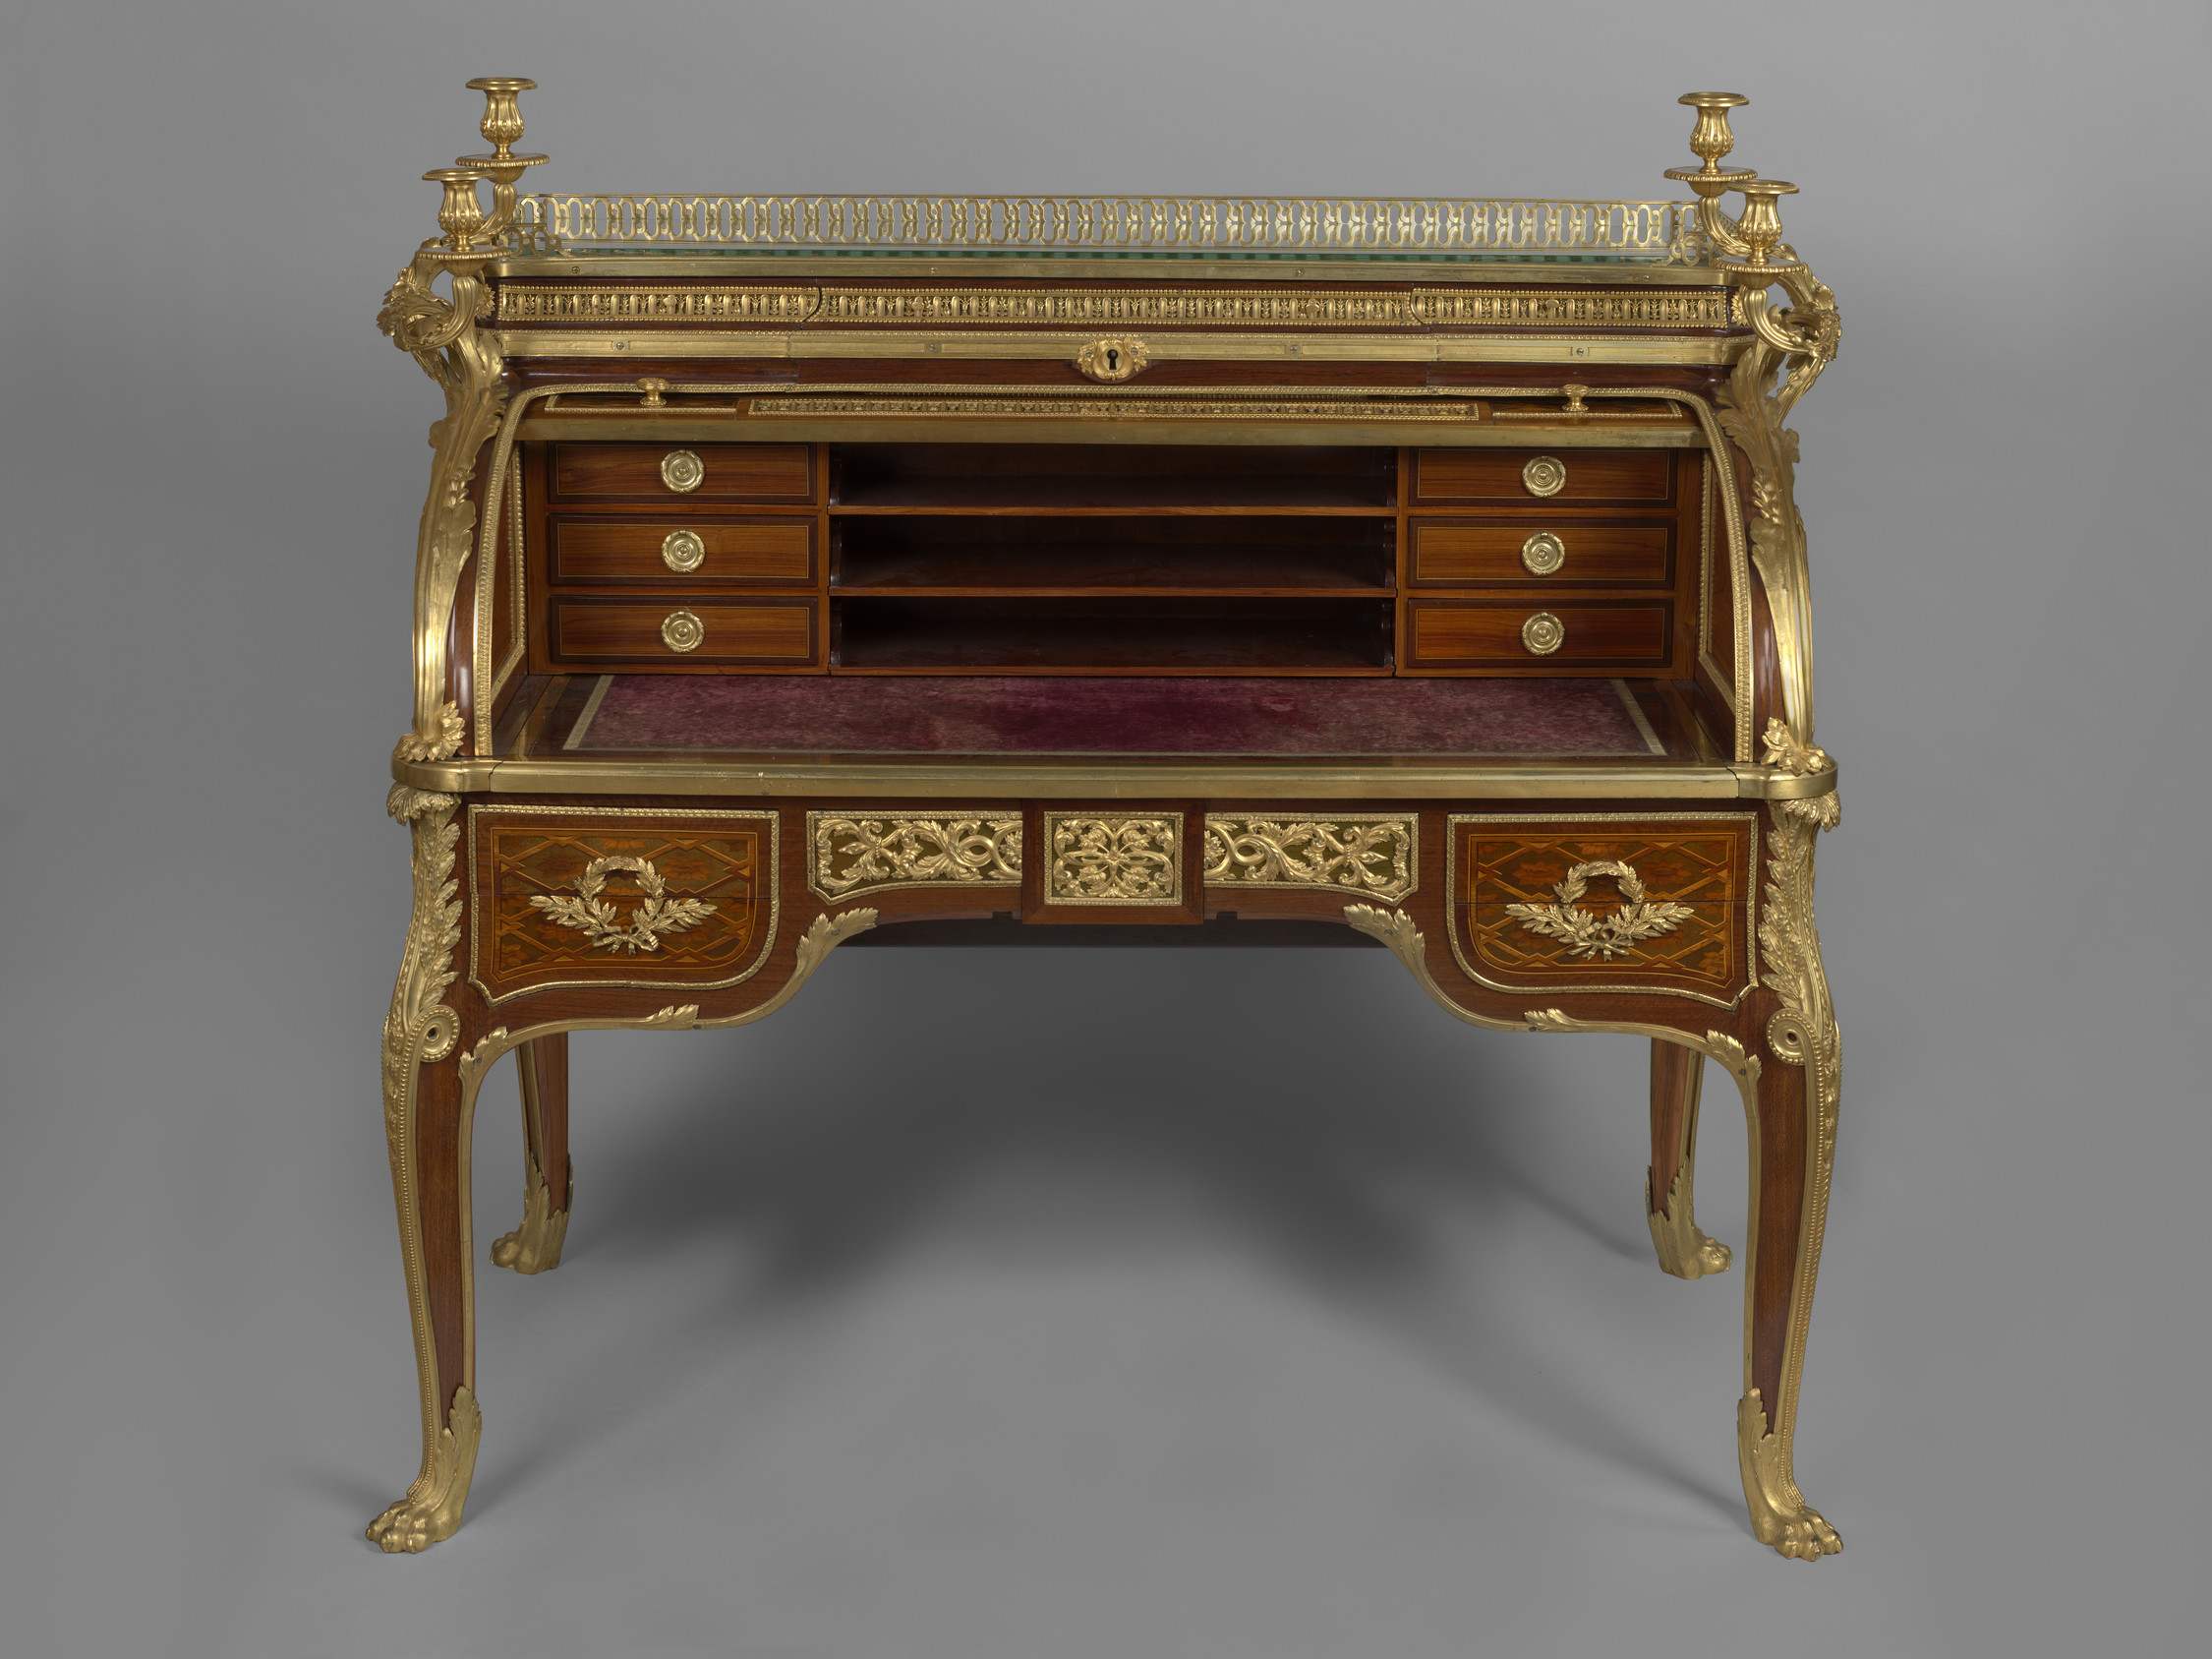 Roll-top desk veneered in purplewood, mahogany, casuarina wood, holly, boxwood, sycamore and other woods, partly stained and engraved. The top,&nbsp;surrounded by a pierced gilt bronze gallery, is fitted with three drawers, the central&nbsp;drawer forming